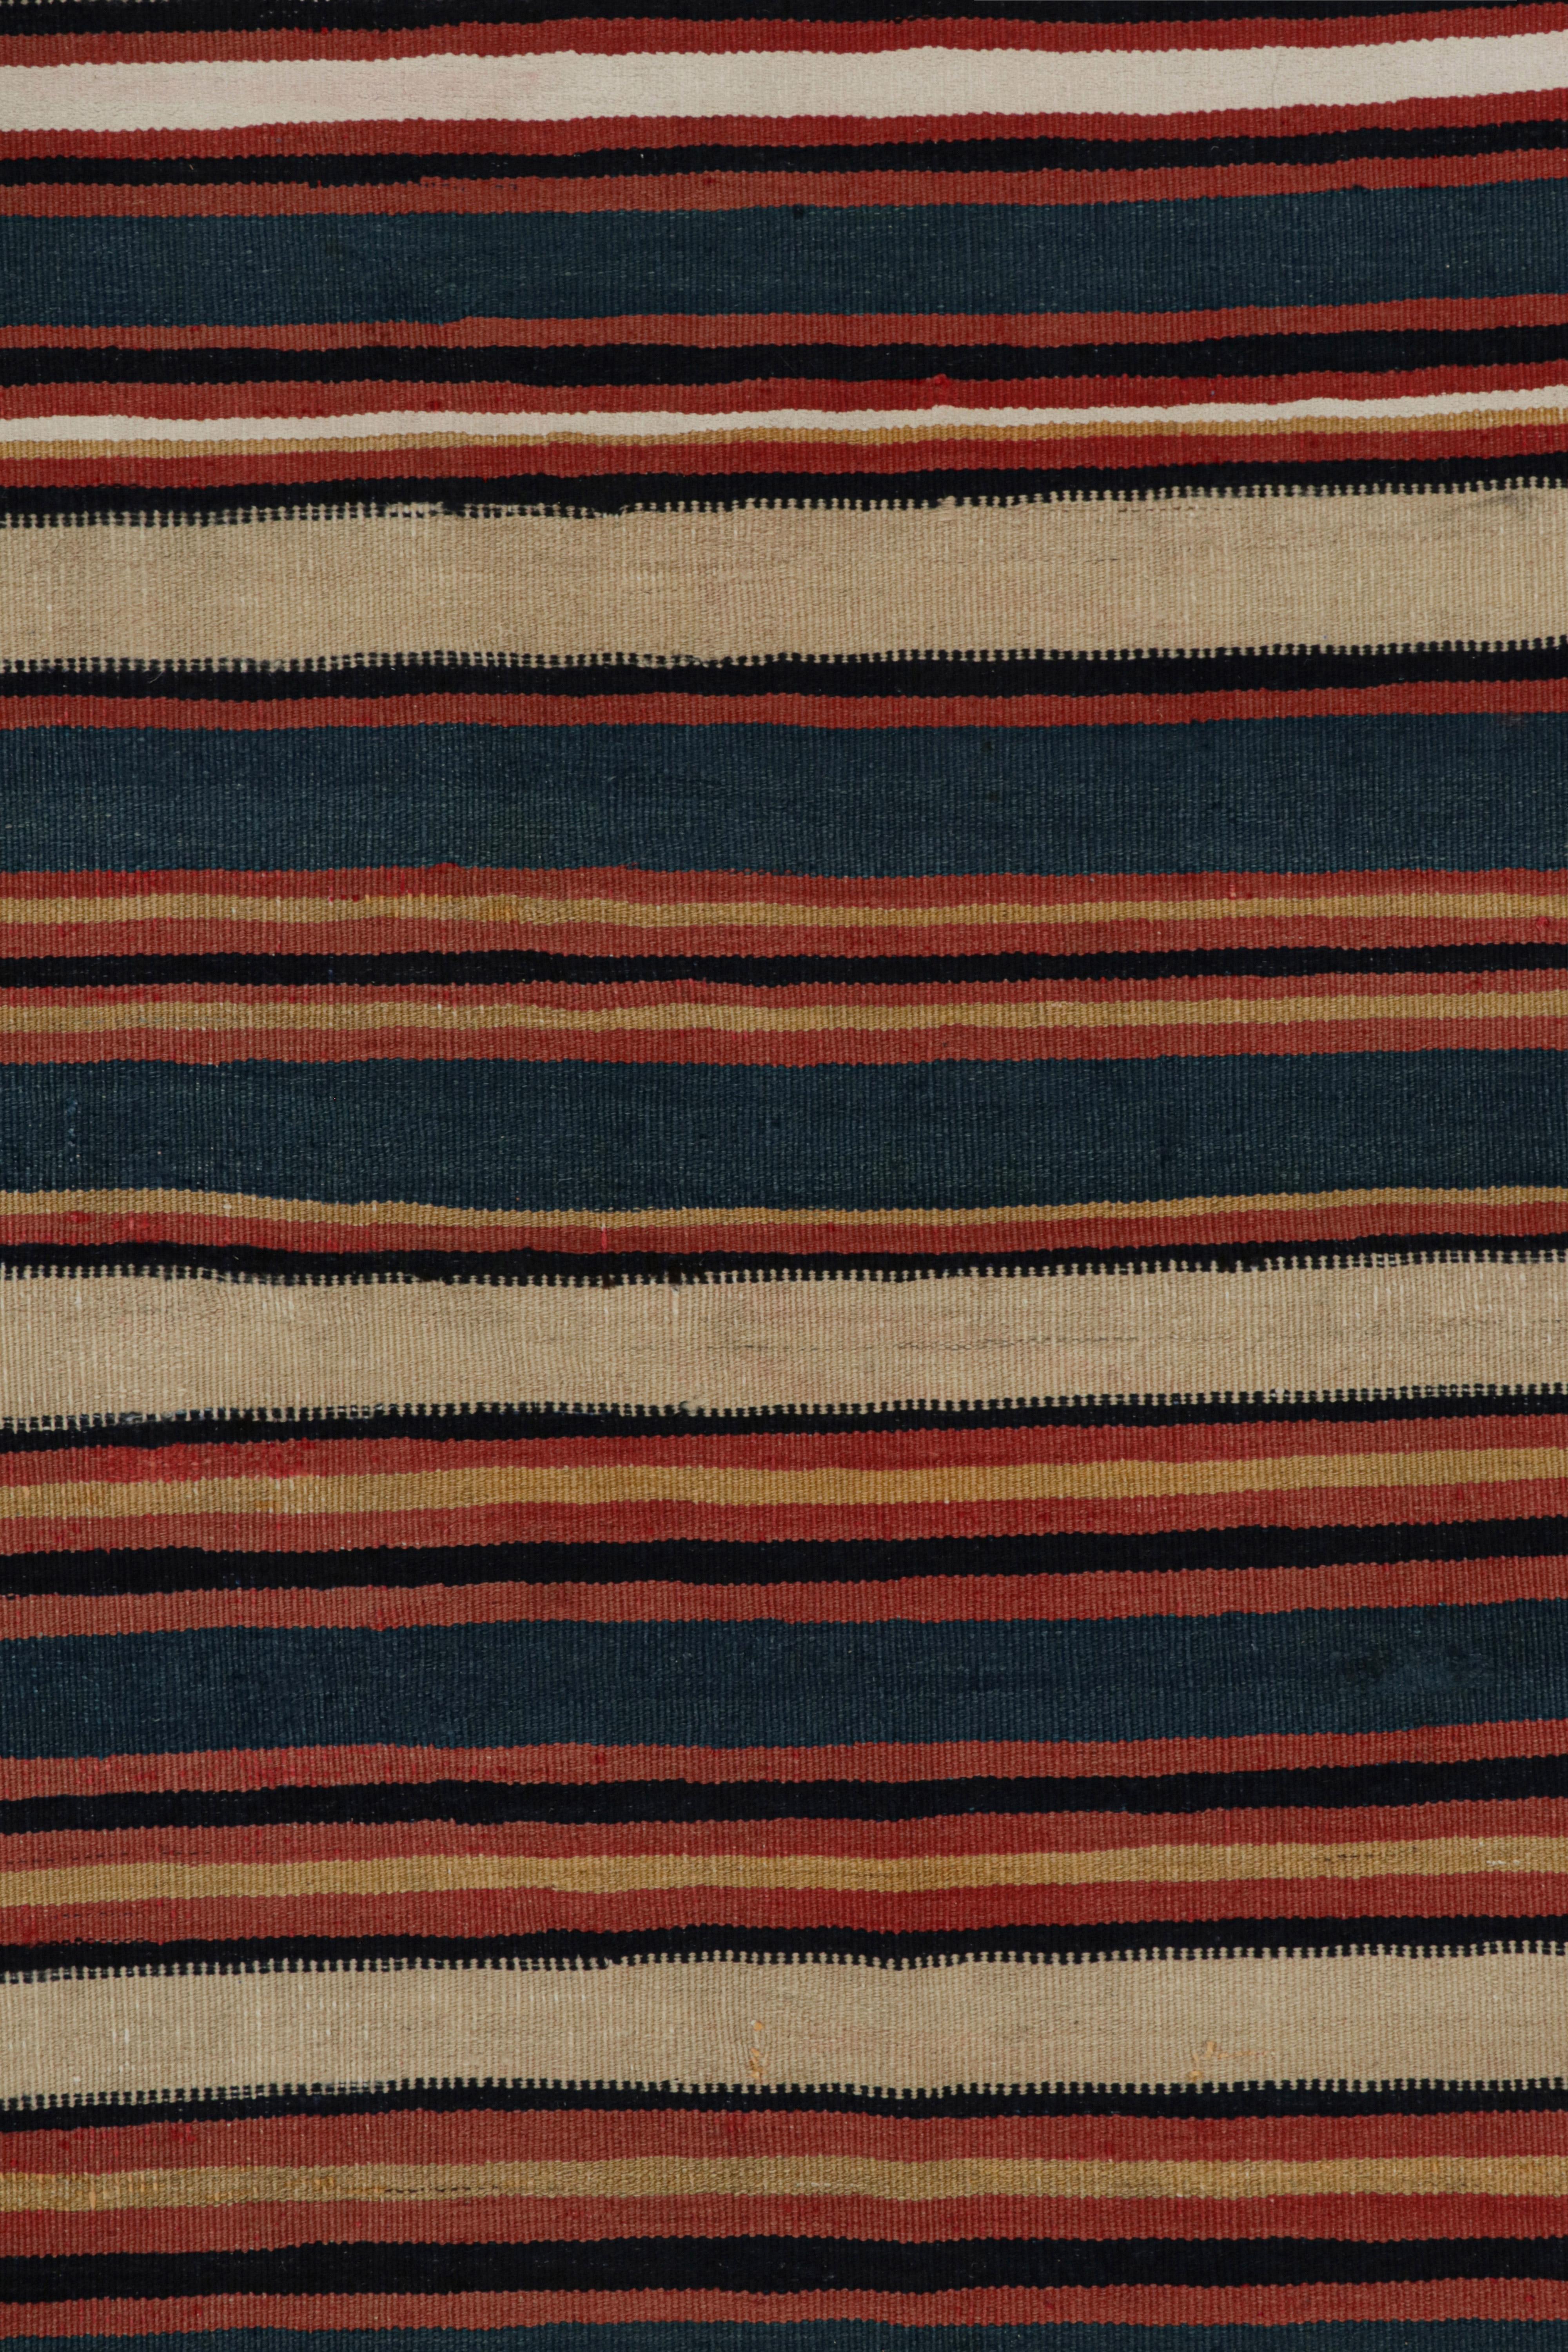 Mid-20th Century Vintage Afghani tribal Kilim runner rug, with Stripes, from Rug & Kilim For Sale